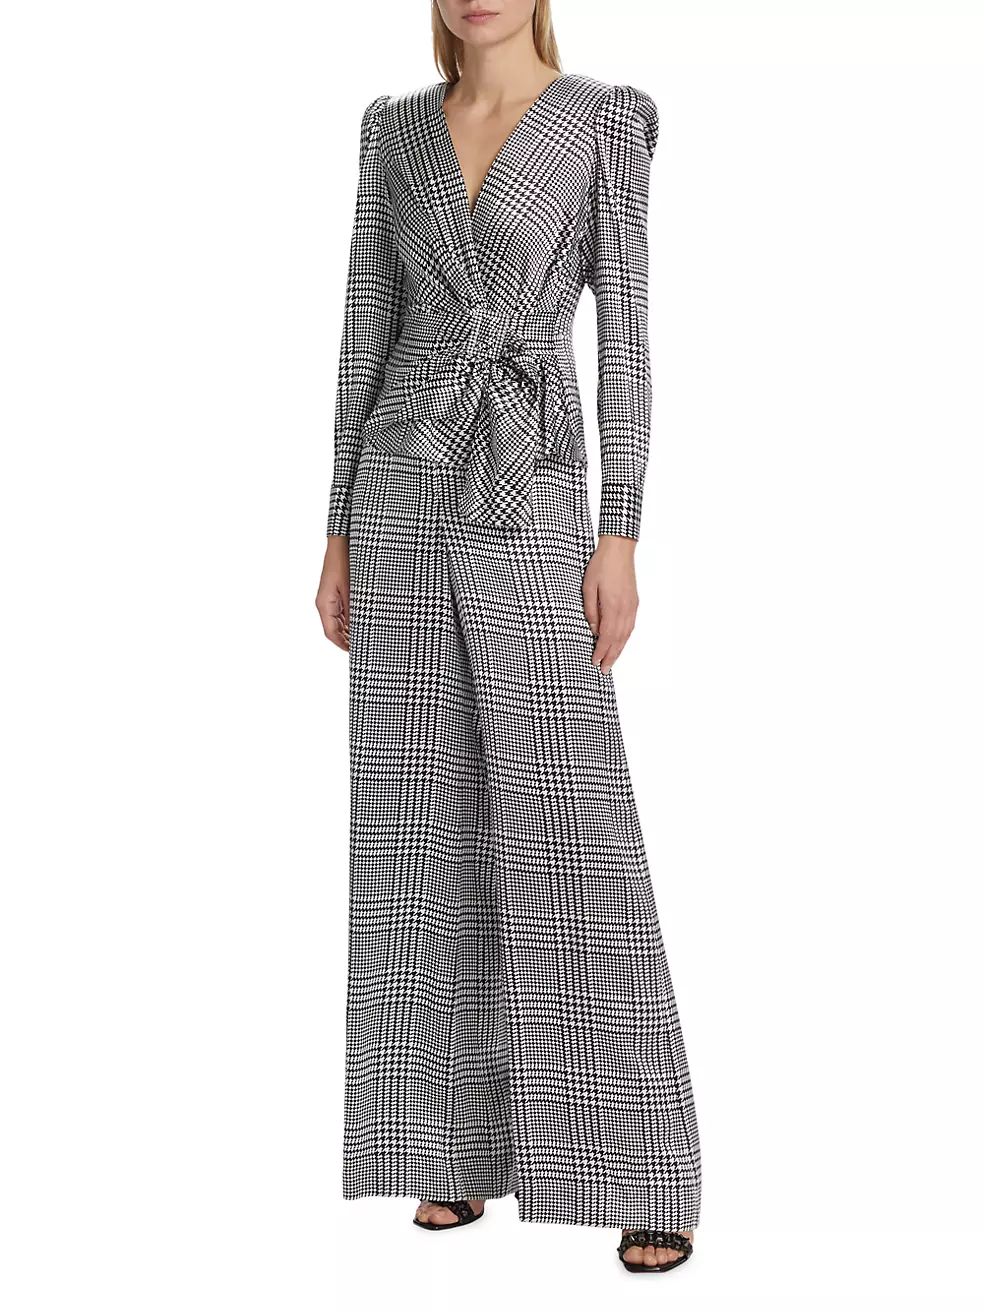 L'AGENCE


Gavin Plaid Wide-Leg Silk Trousers



4.1 out of 5 Customer Rating | Saks Fifth Avenue